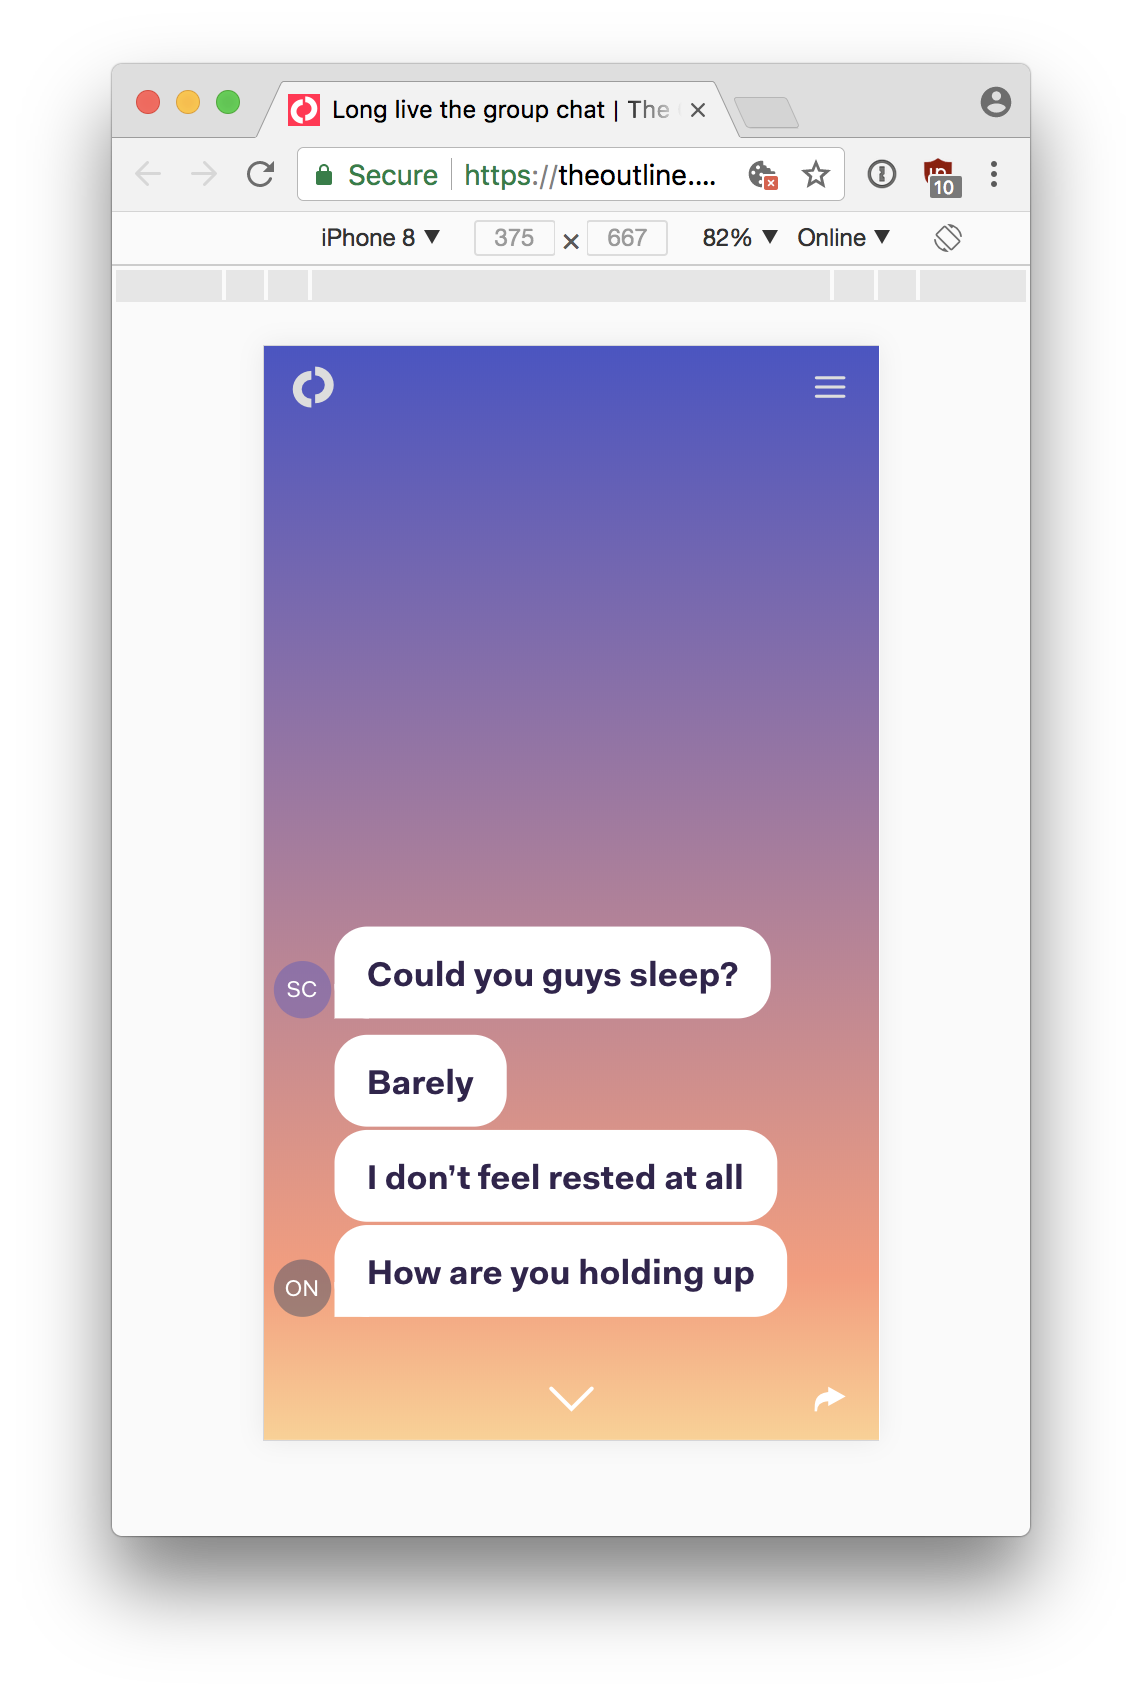 Long live group chat from Outline